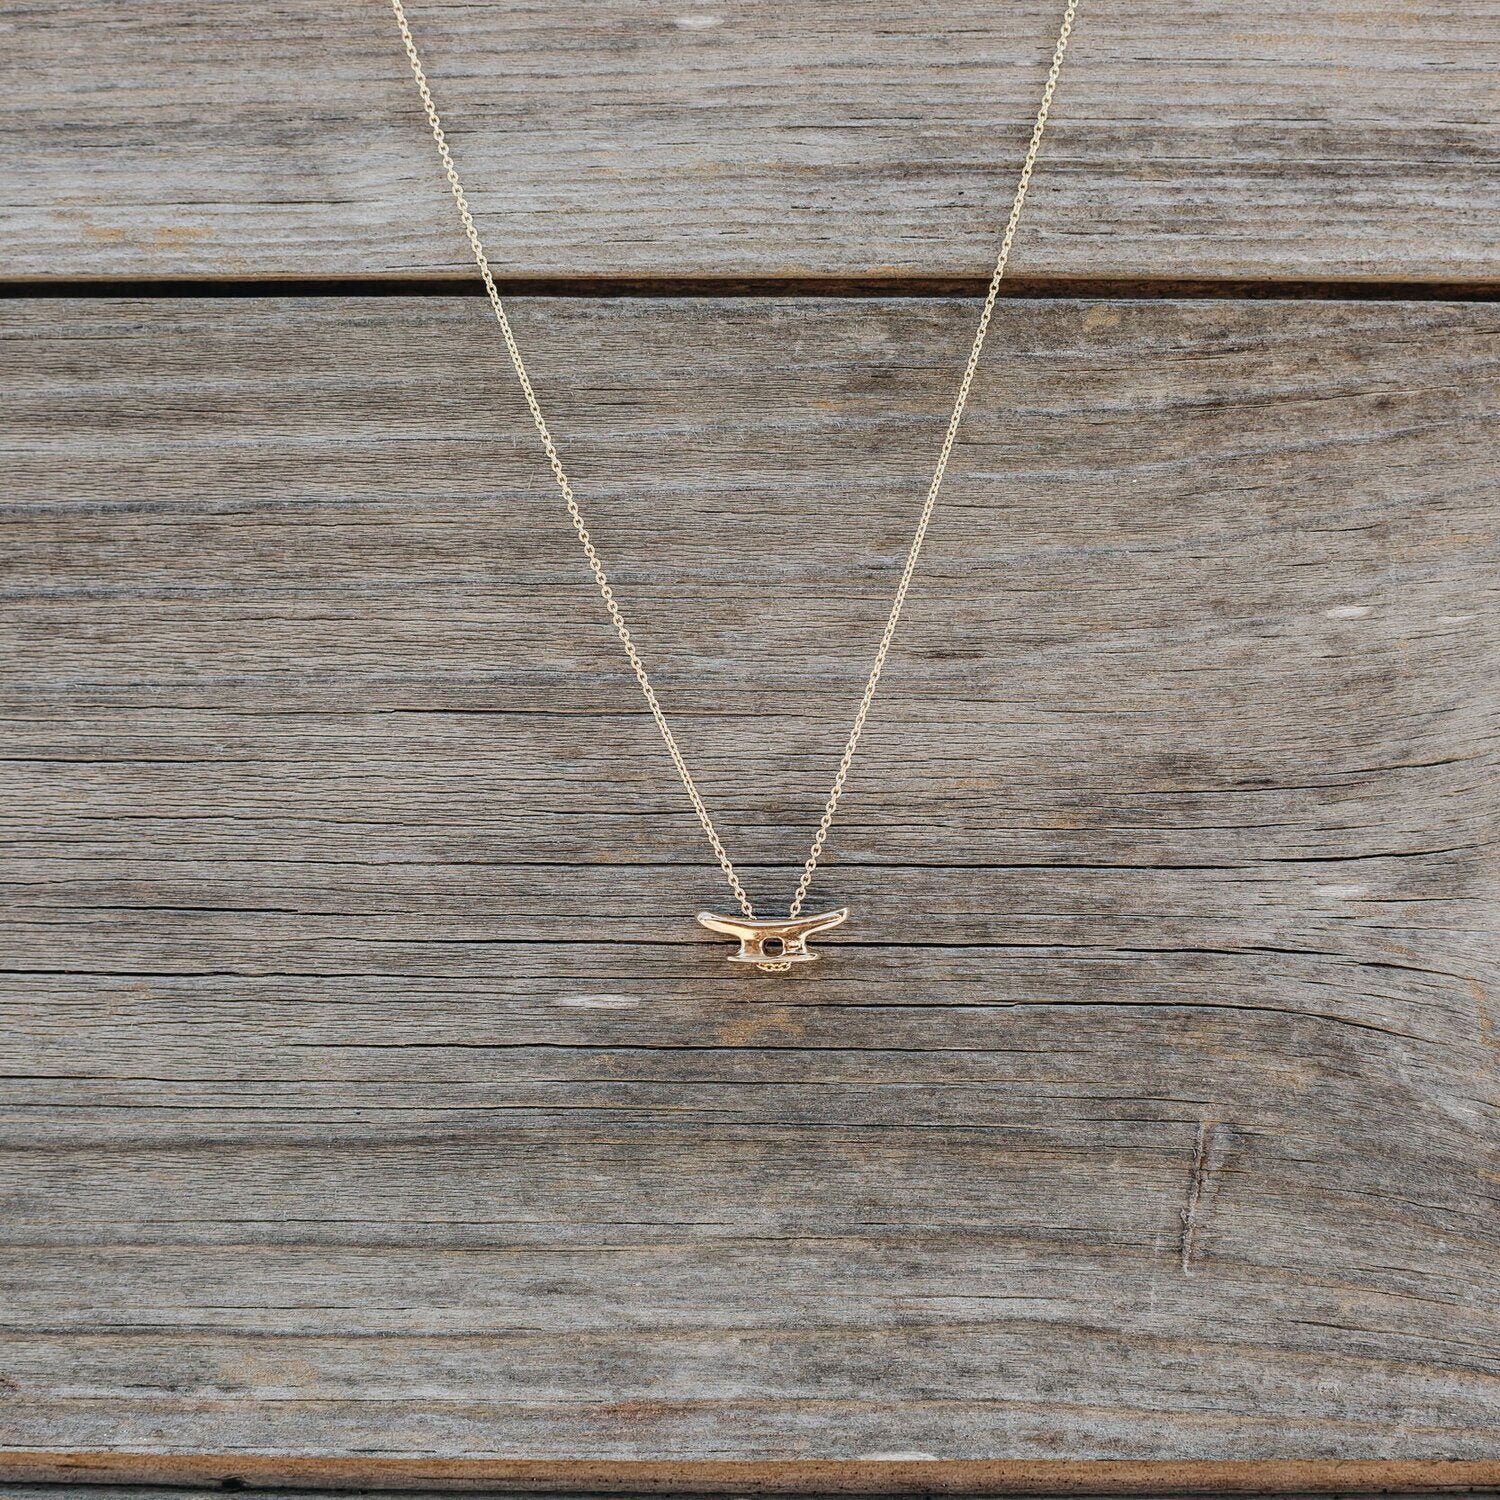 Cleat Necklace in 14K Yellow Gold handmade by Jewel in the Sea Nantucket